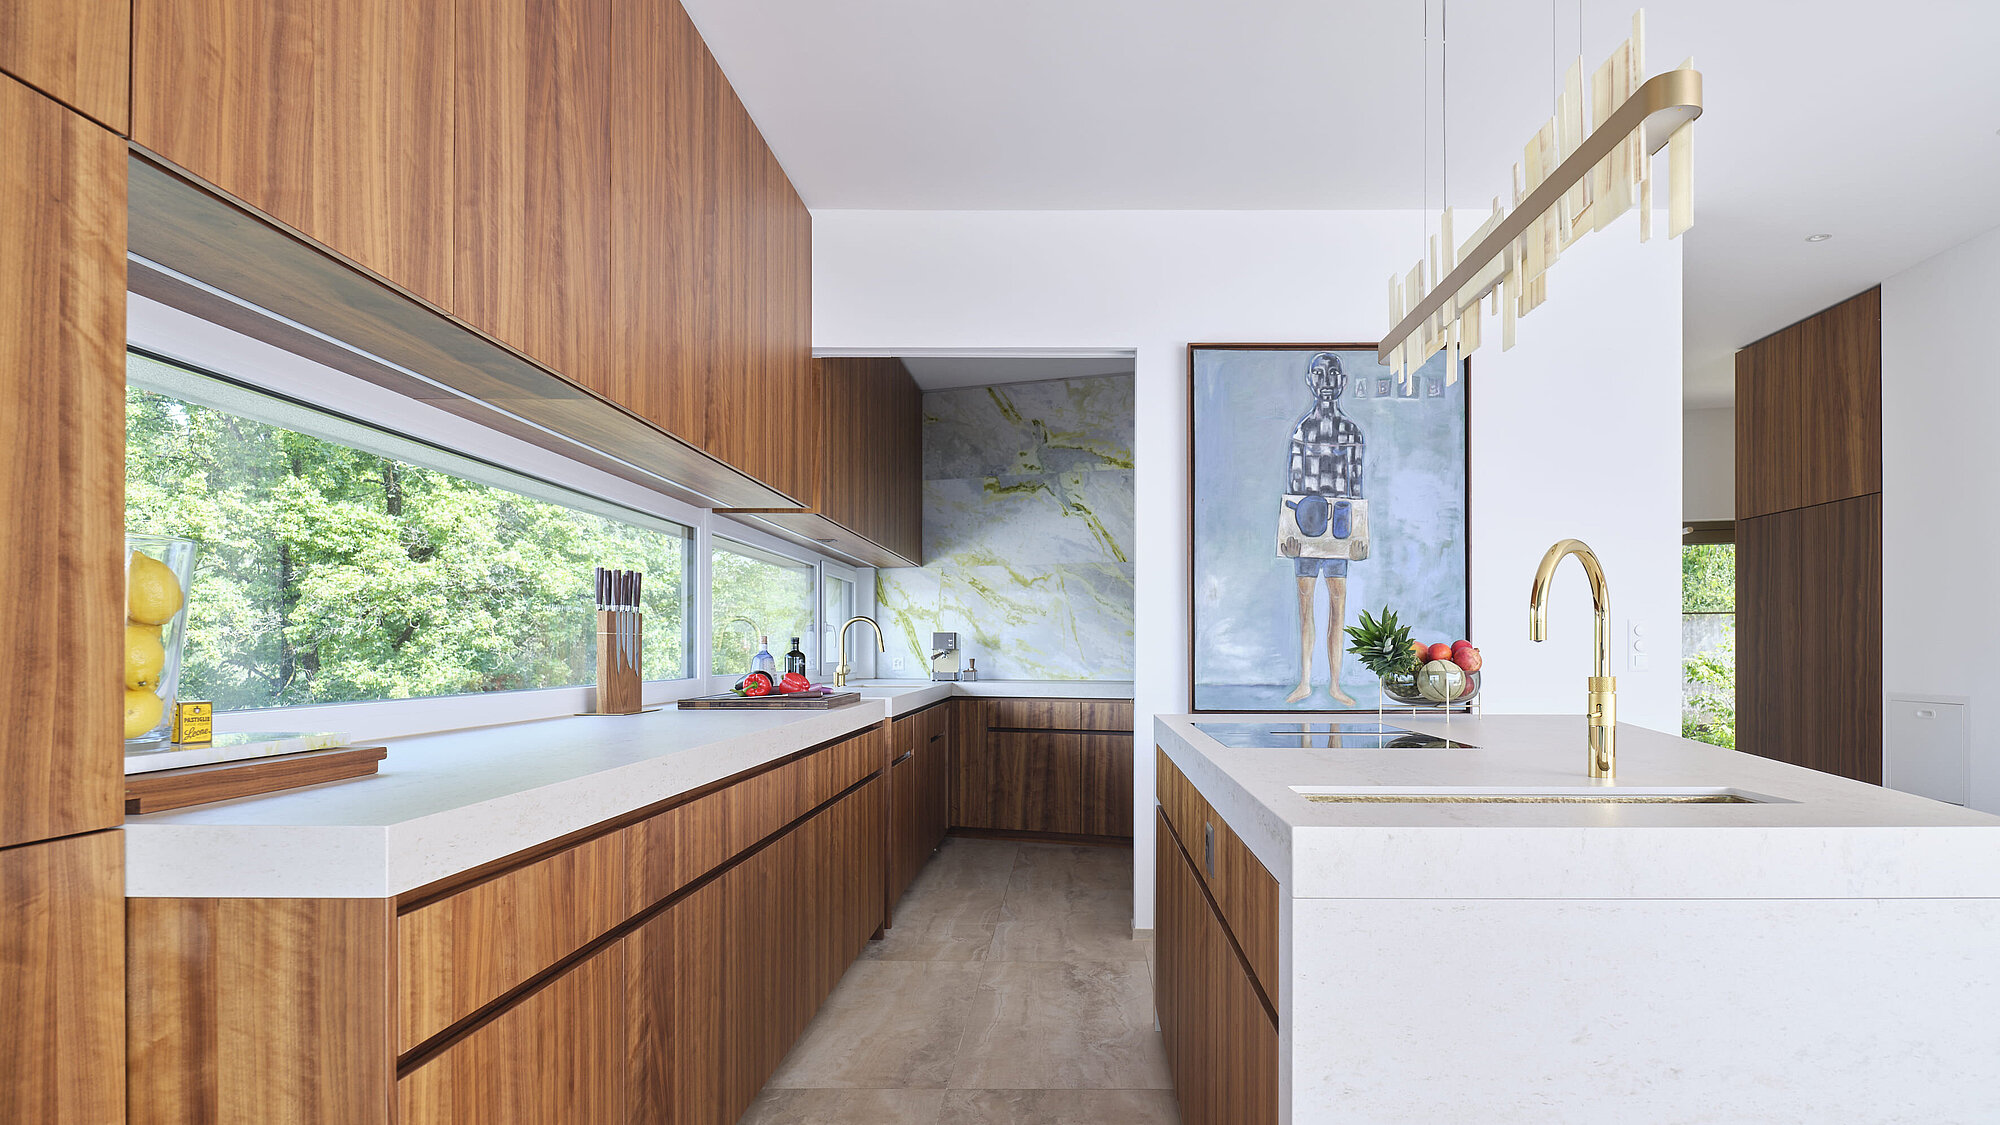 Interior view of the VILLA HECHT detached house, kitchen